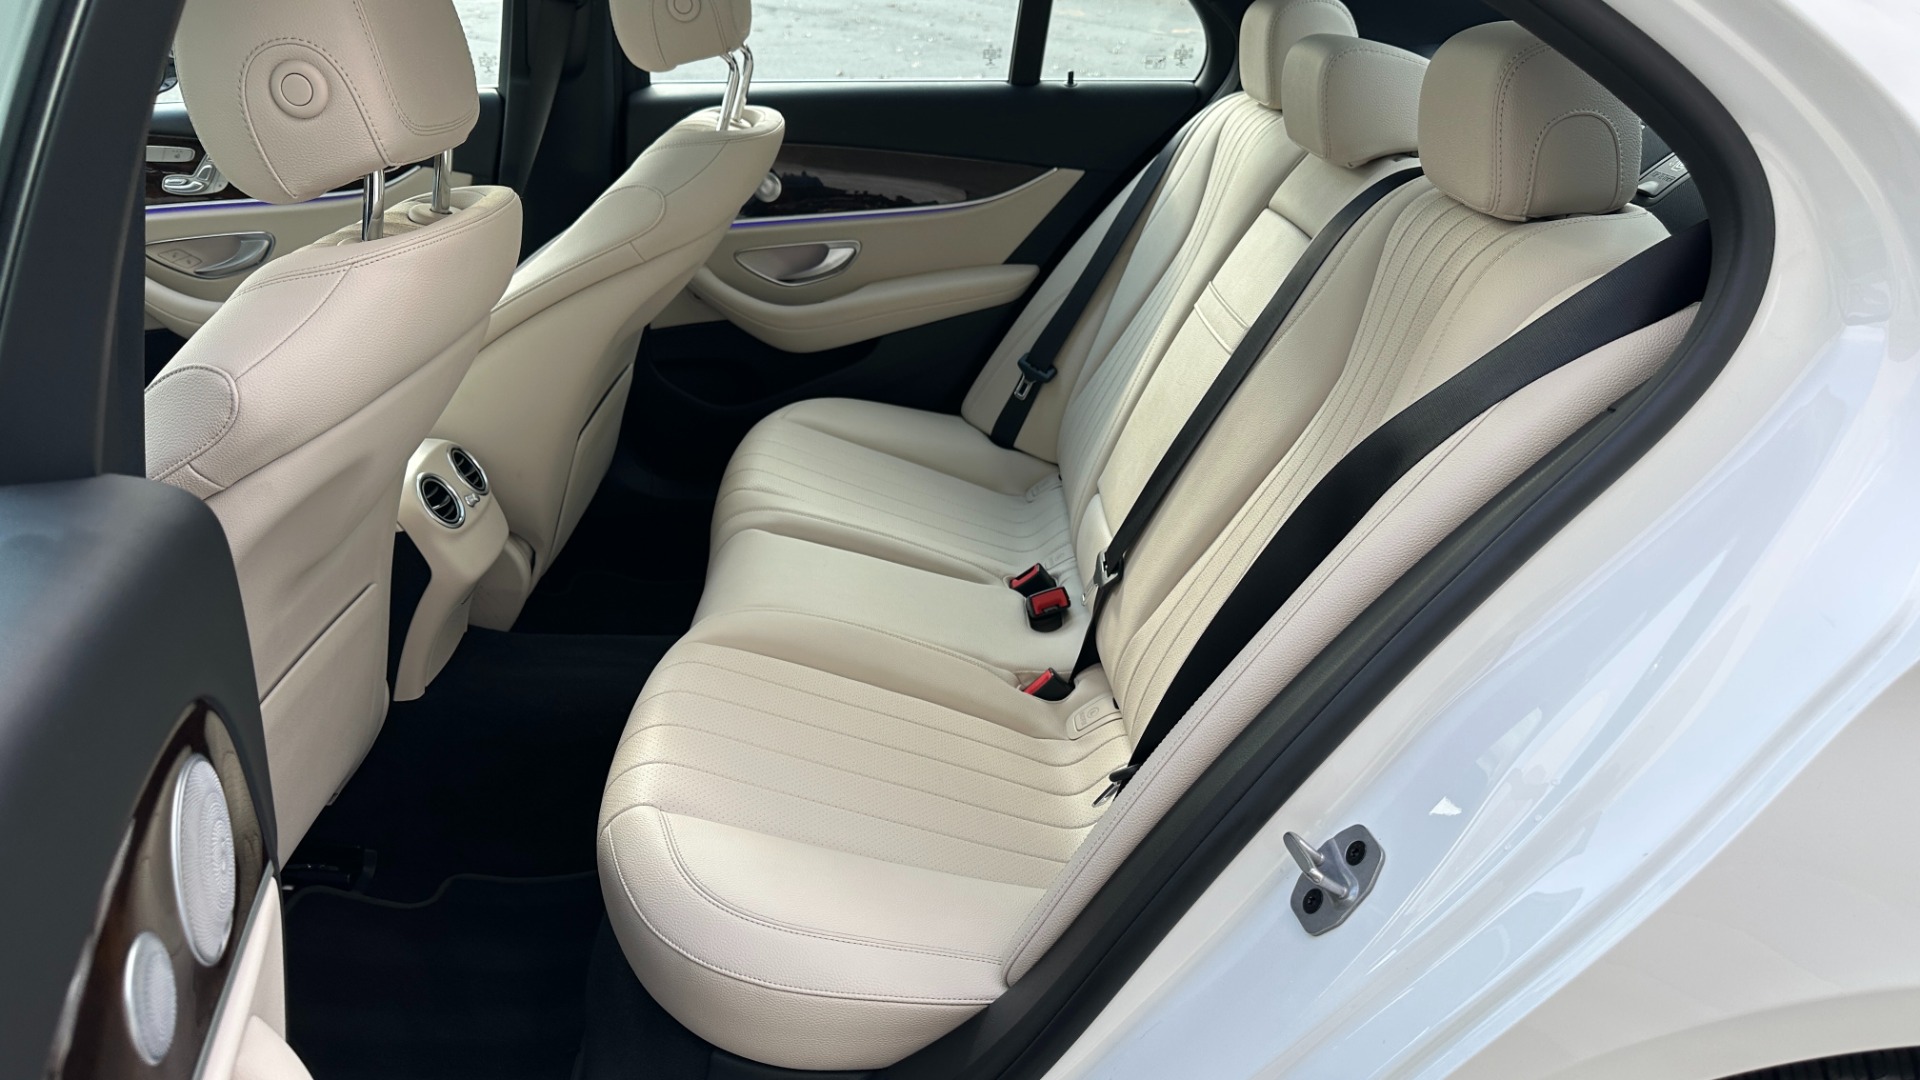 Used 2019 Mercedes-Benz E-Class E300 / PREMIUM PACKAGE / BLIND SPOT / BURMESTER SOUND / HEATED STEERING for sale $41,495 at Formula Imports in Charlotte NC 28227 15